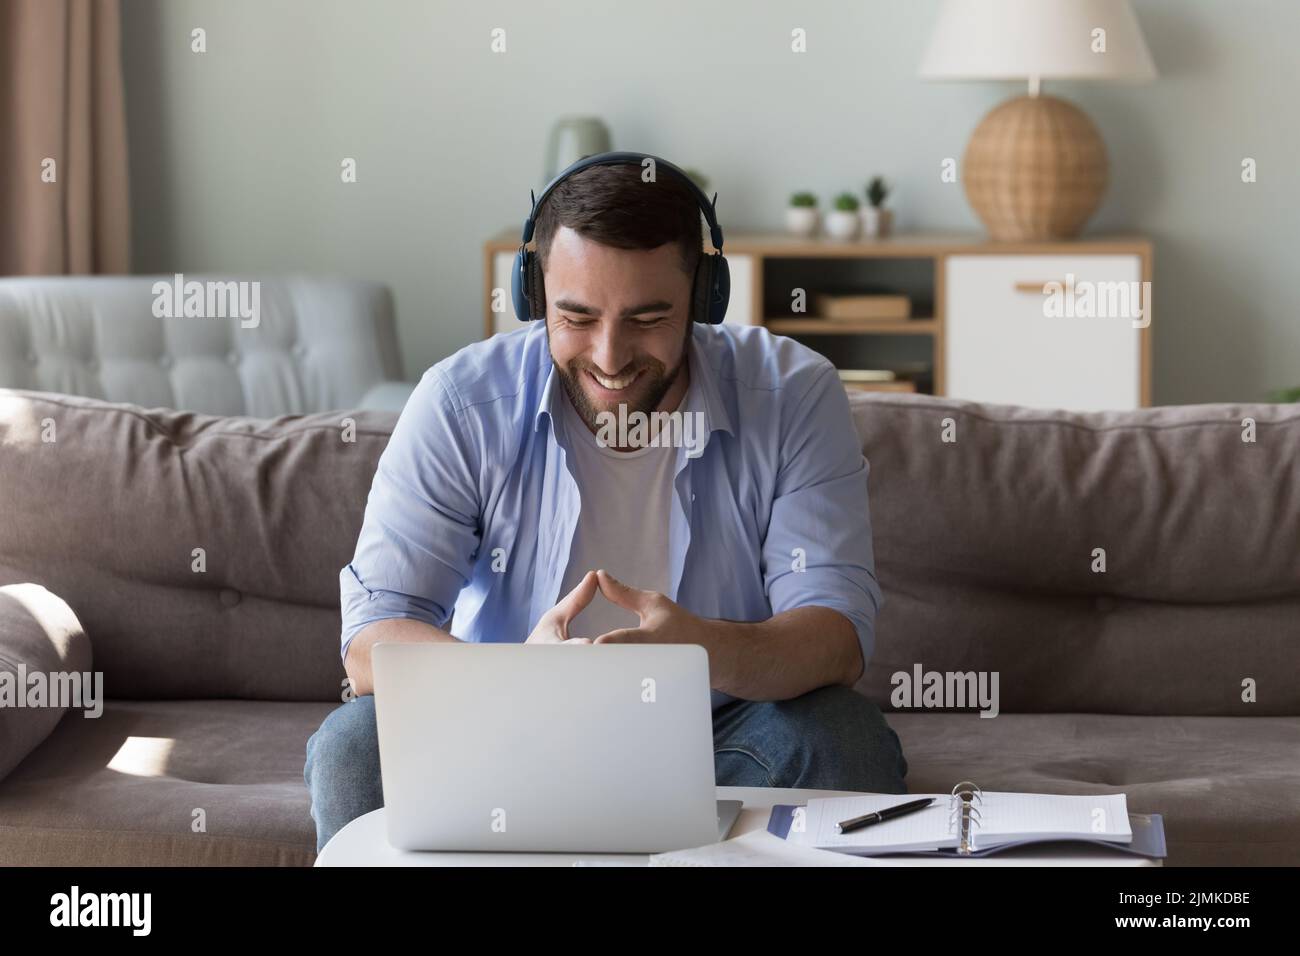 Smiling man take part in video call at home Stock Photo